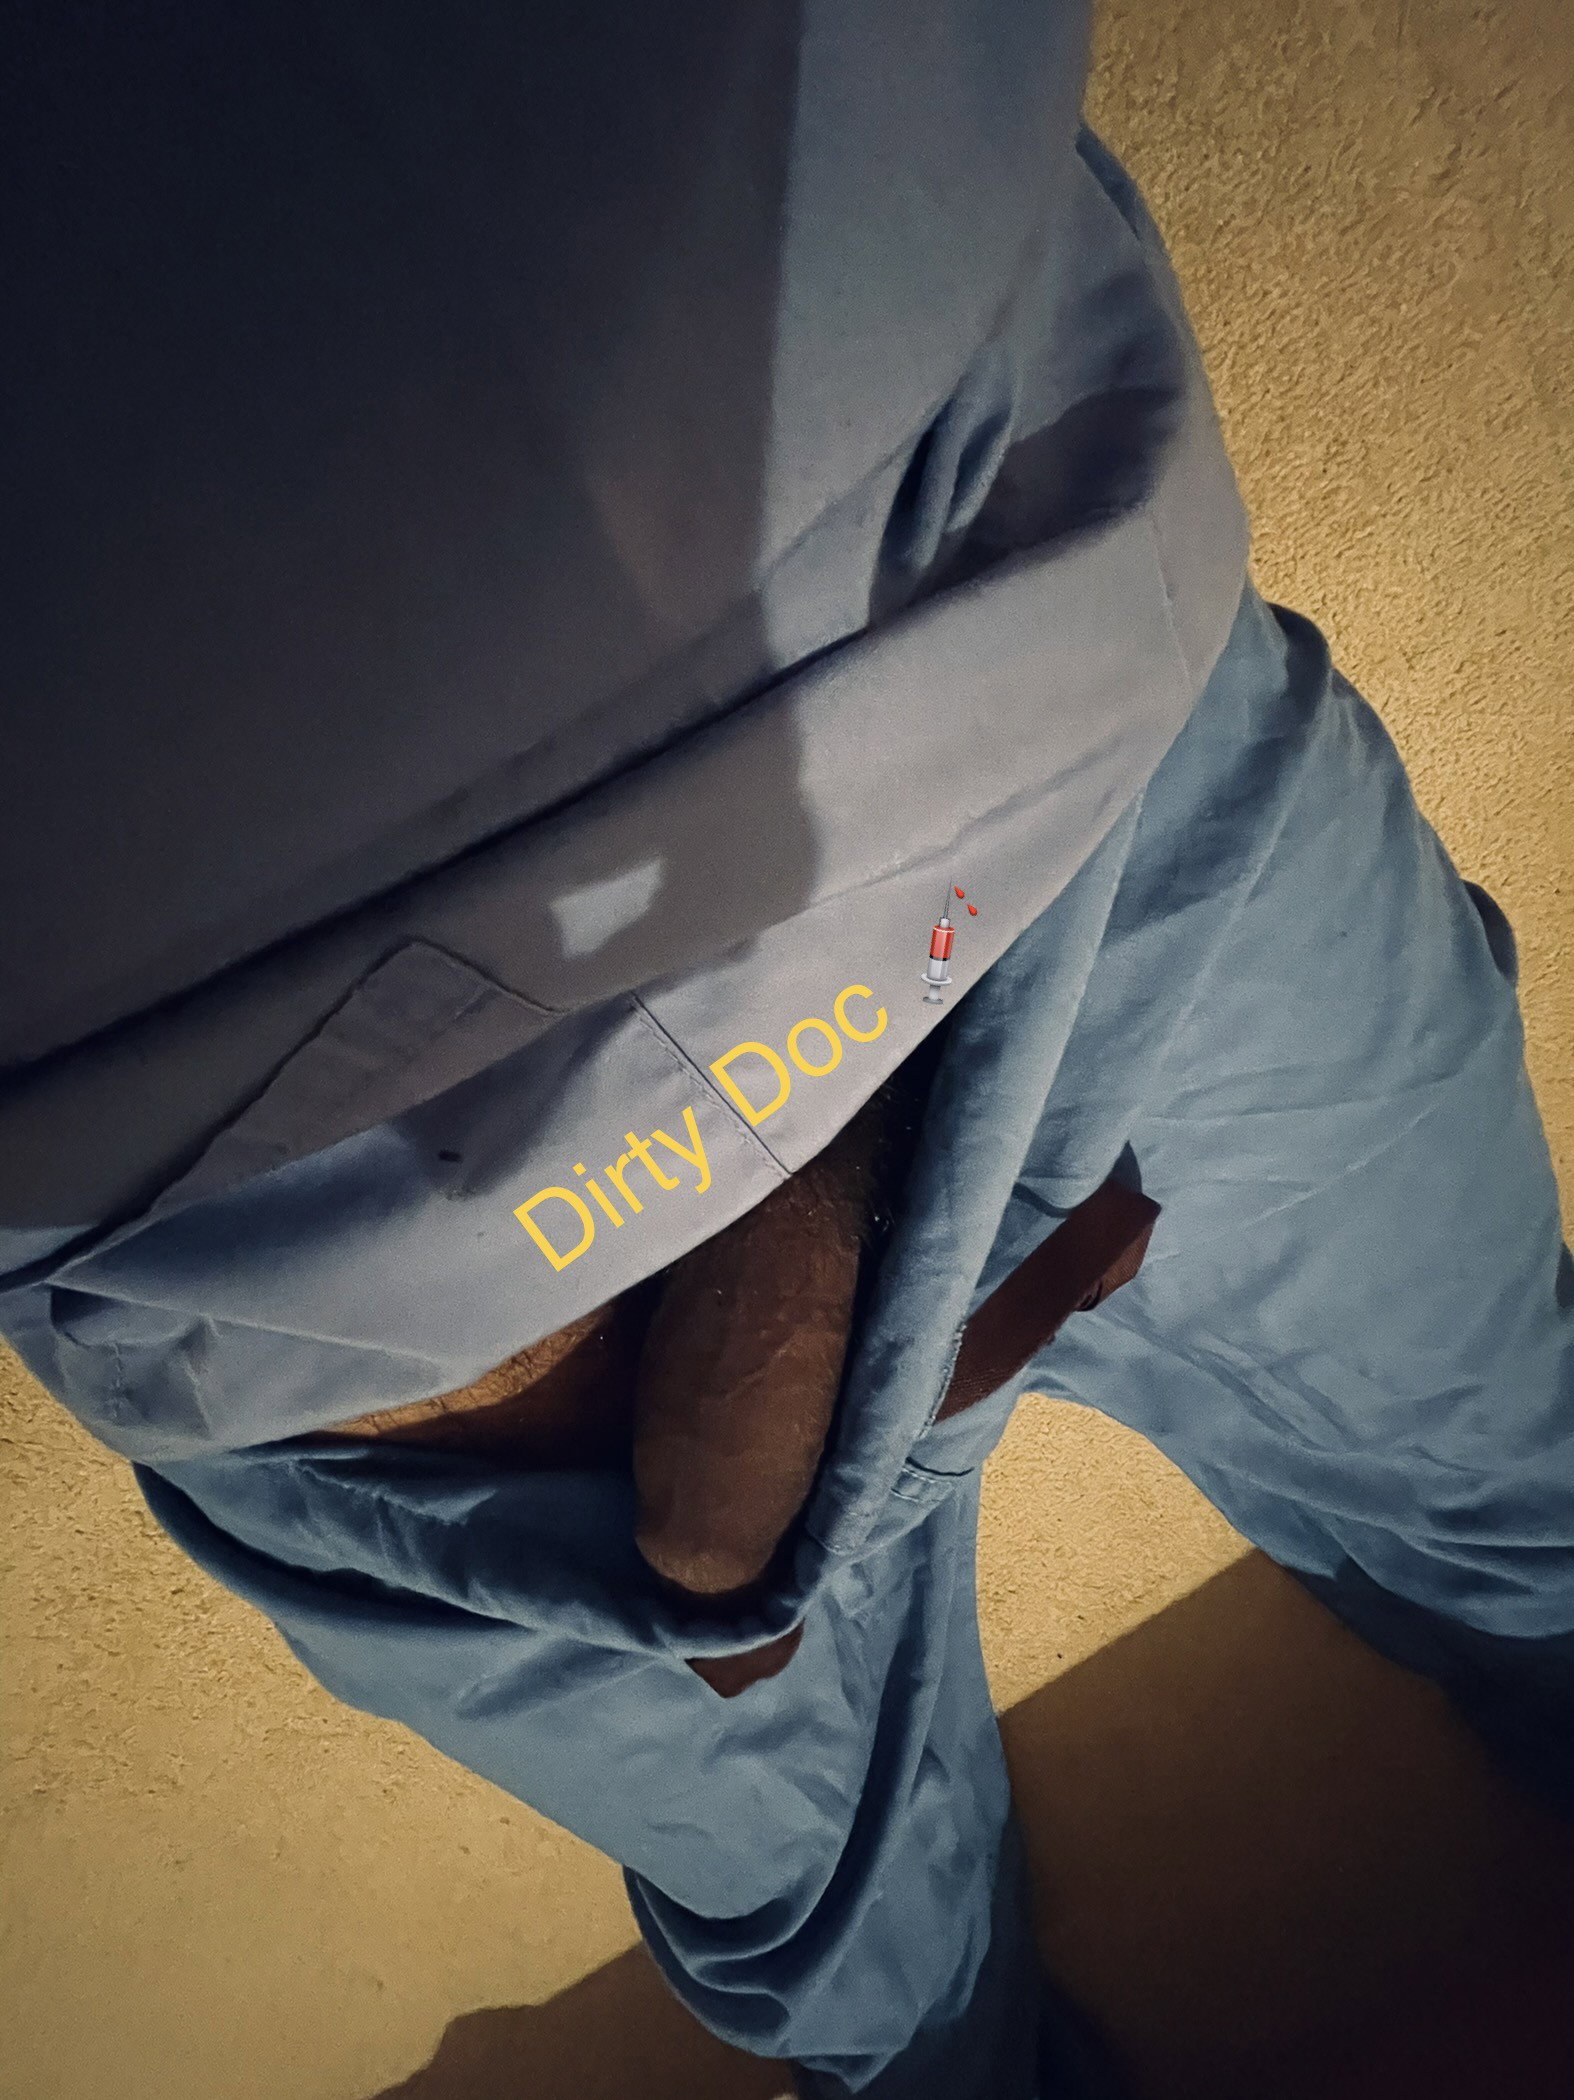 Watch the Photo by Dirty Doc with the username @Dirtyydoc, posted on January 3, 2021. The post is about the topic Sexy Nurses. and the text says '"Me" tired..."Him" ready after a hectic shift Just wants out..🩺💉🦠 more to come after more likes and shares...
#scrubs #nurses #nurse #peek-a-boo #uniform #mature #bbc #service #uncut #cock #men #workflash #wild #dick #bull #desire #adult #hot'